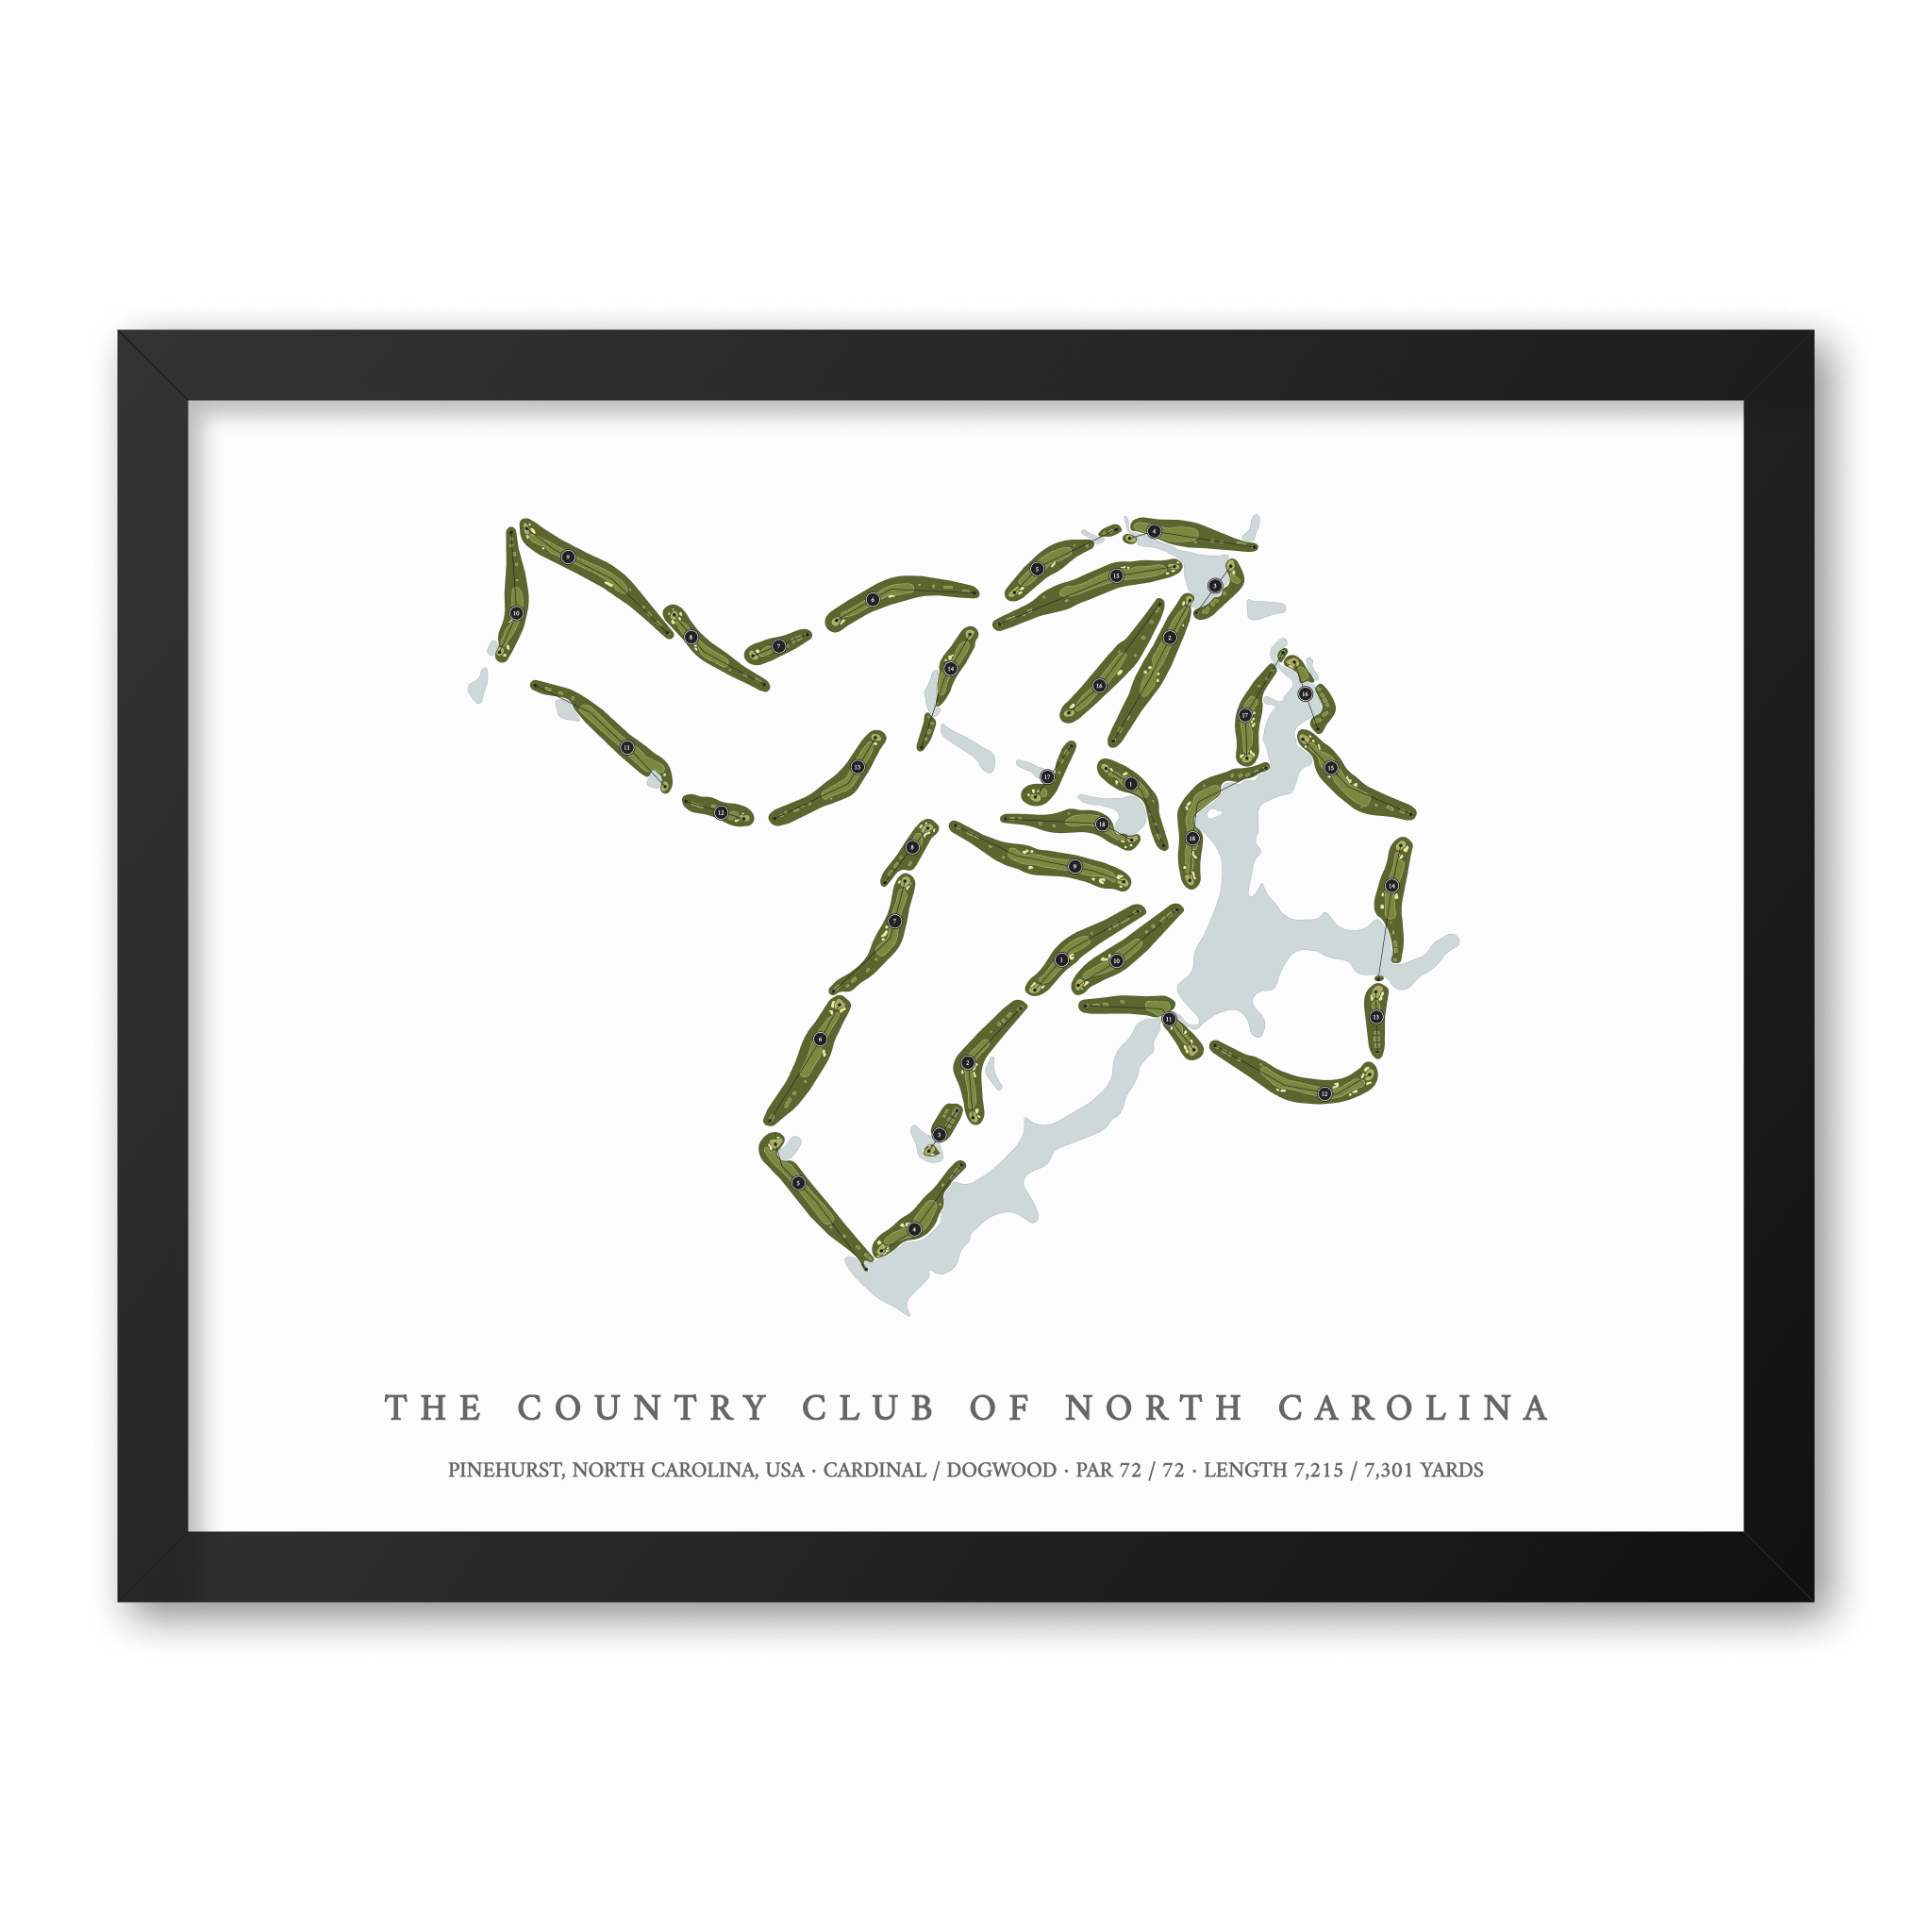 The Country Club of North Carolina | Golf Course Map | Black Frame